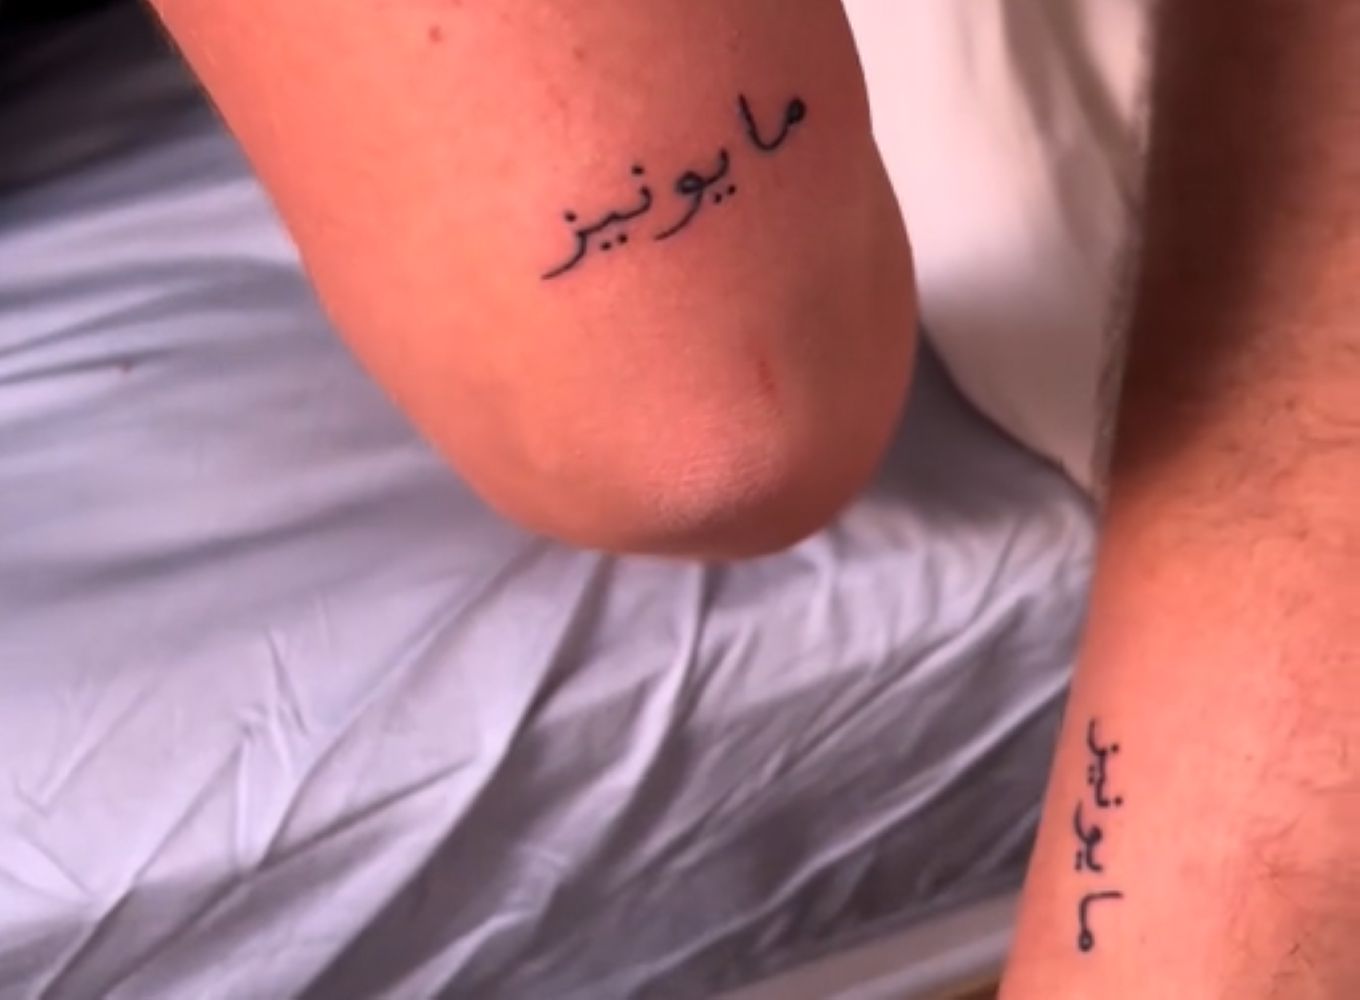 A tourist got a tattoo in Morocco.  The Internet is full of laughter